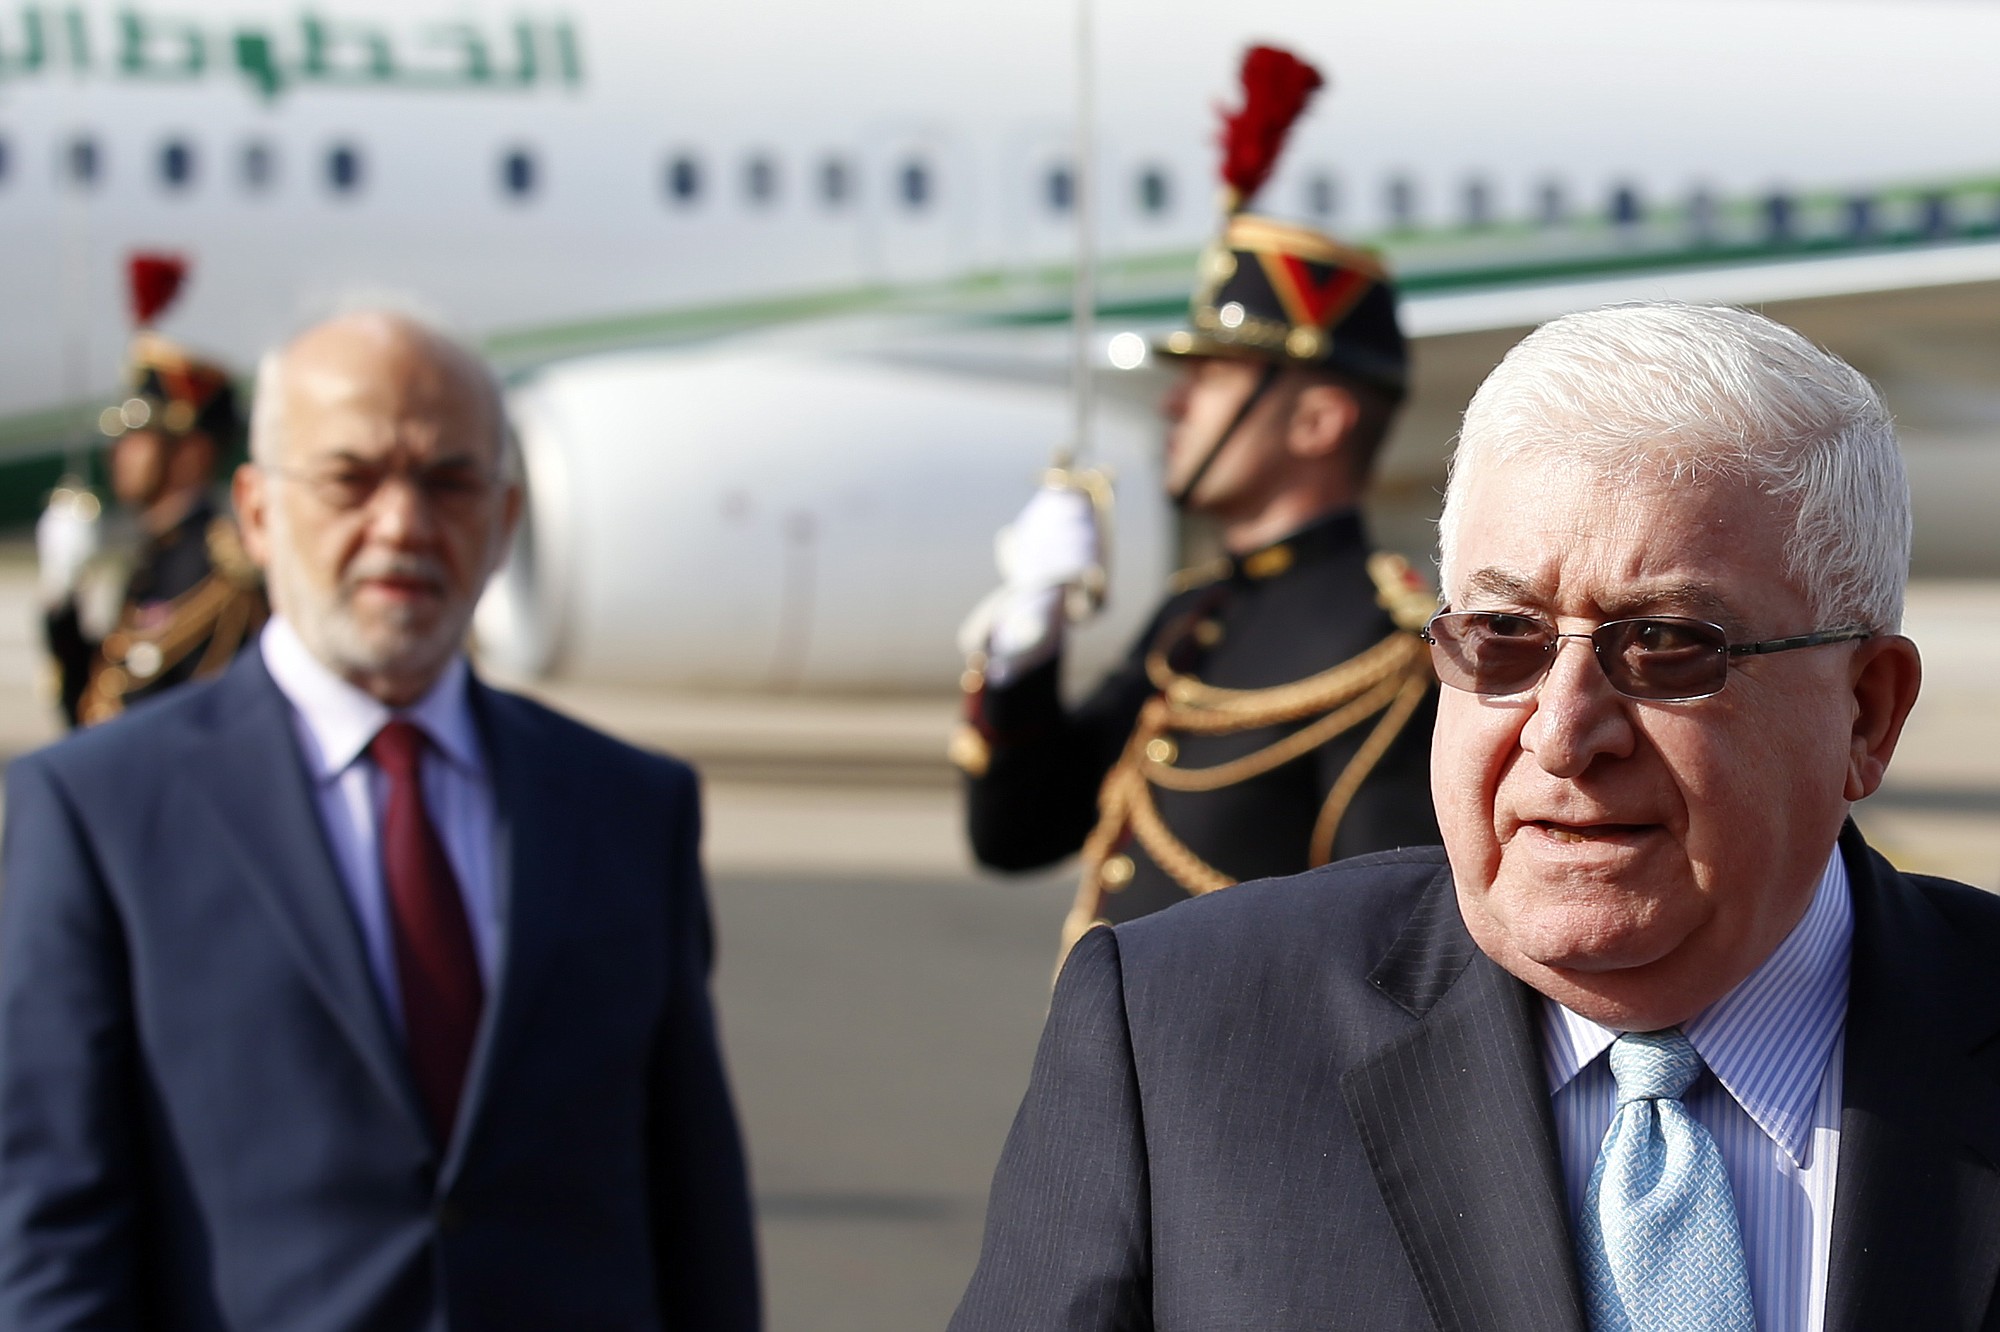 Fran?ois Mori/Associated Press
Iraq President Fouad Massoum, right, followed by Iraq Foreign Minister Ibrahim Al-Jaafari, arrive Sunday with Iraqi officials at Orly airport south of Paris ahead of a conference with diplomats from around the world.